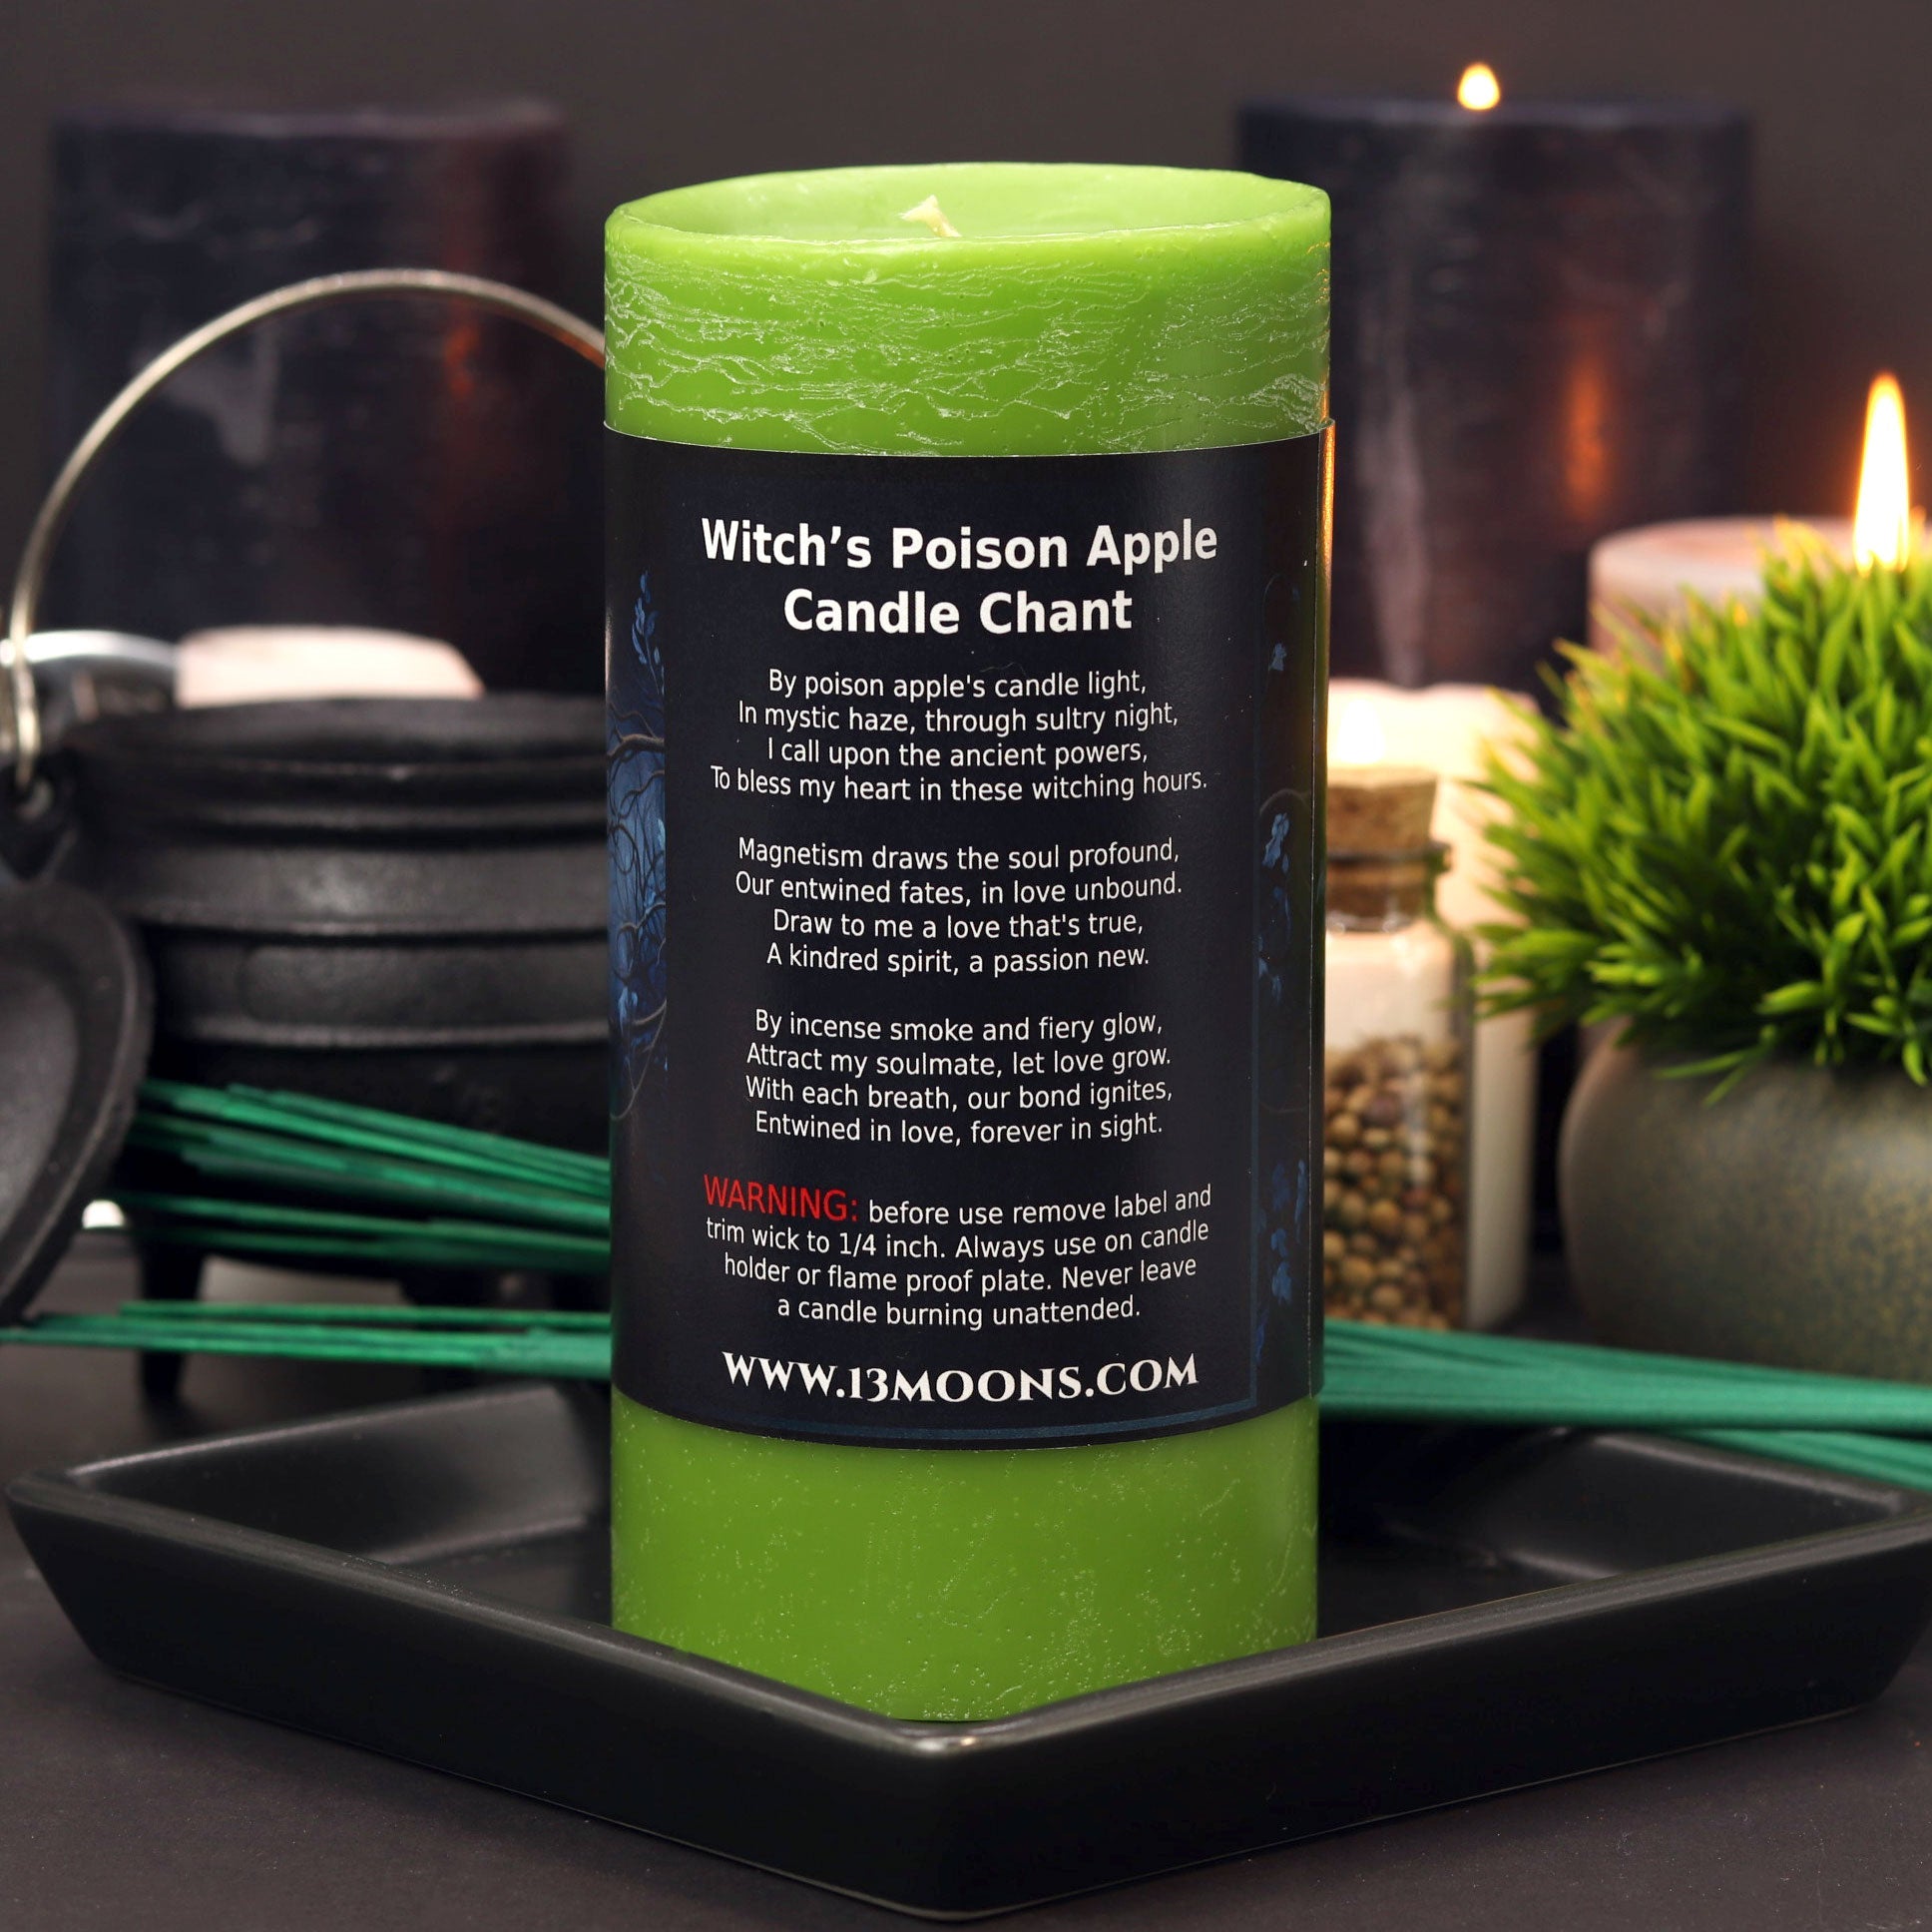 Witch's Poison Apple Ritual Candle Large Pillar - 13 Moons